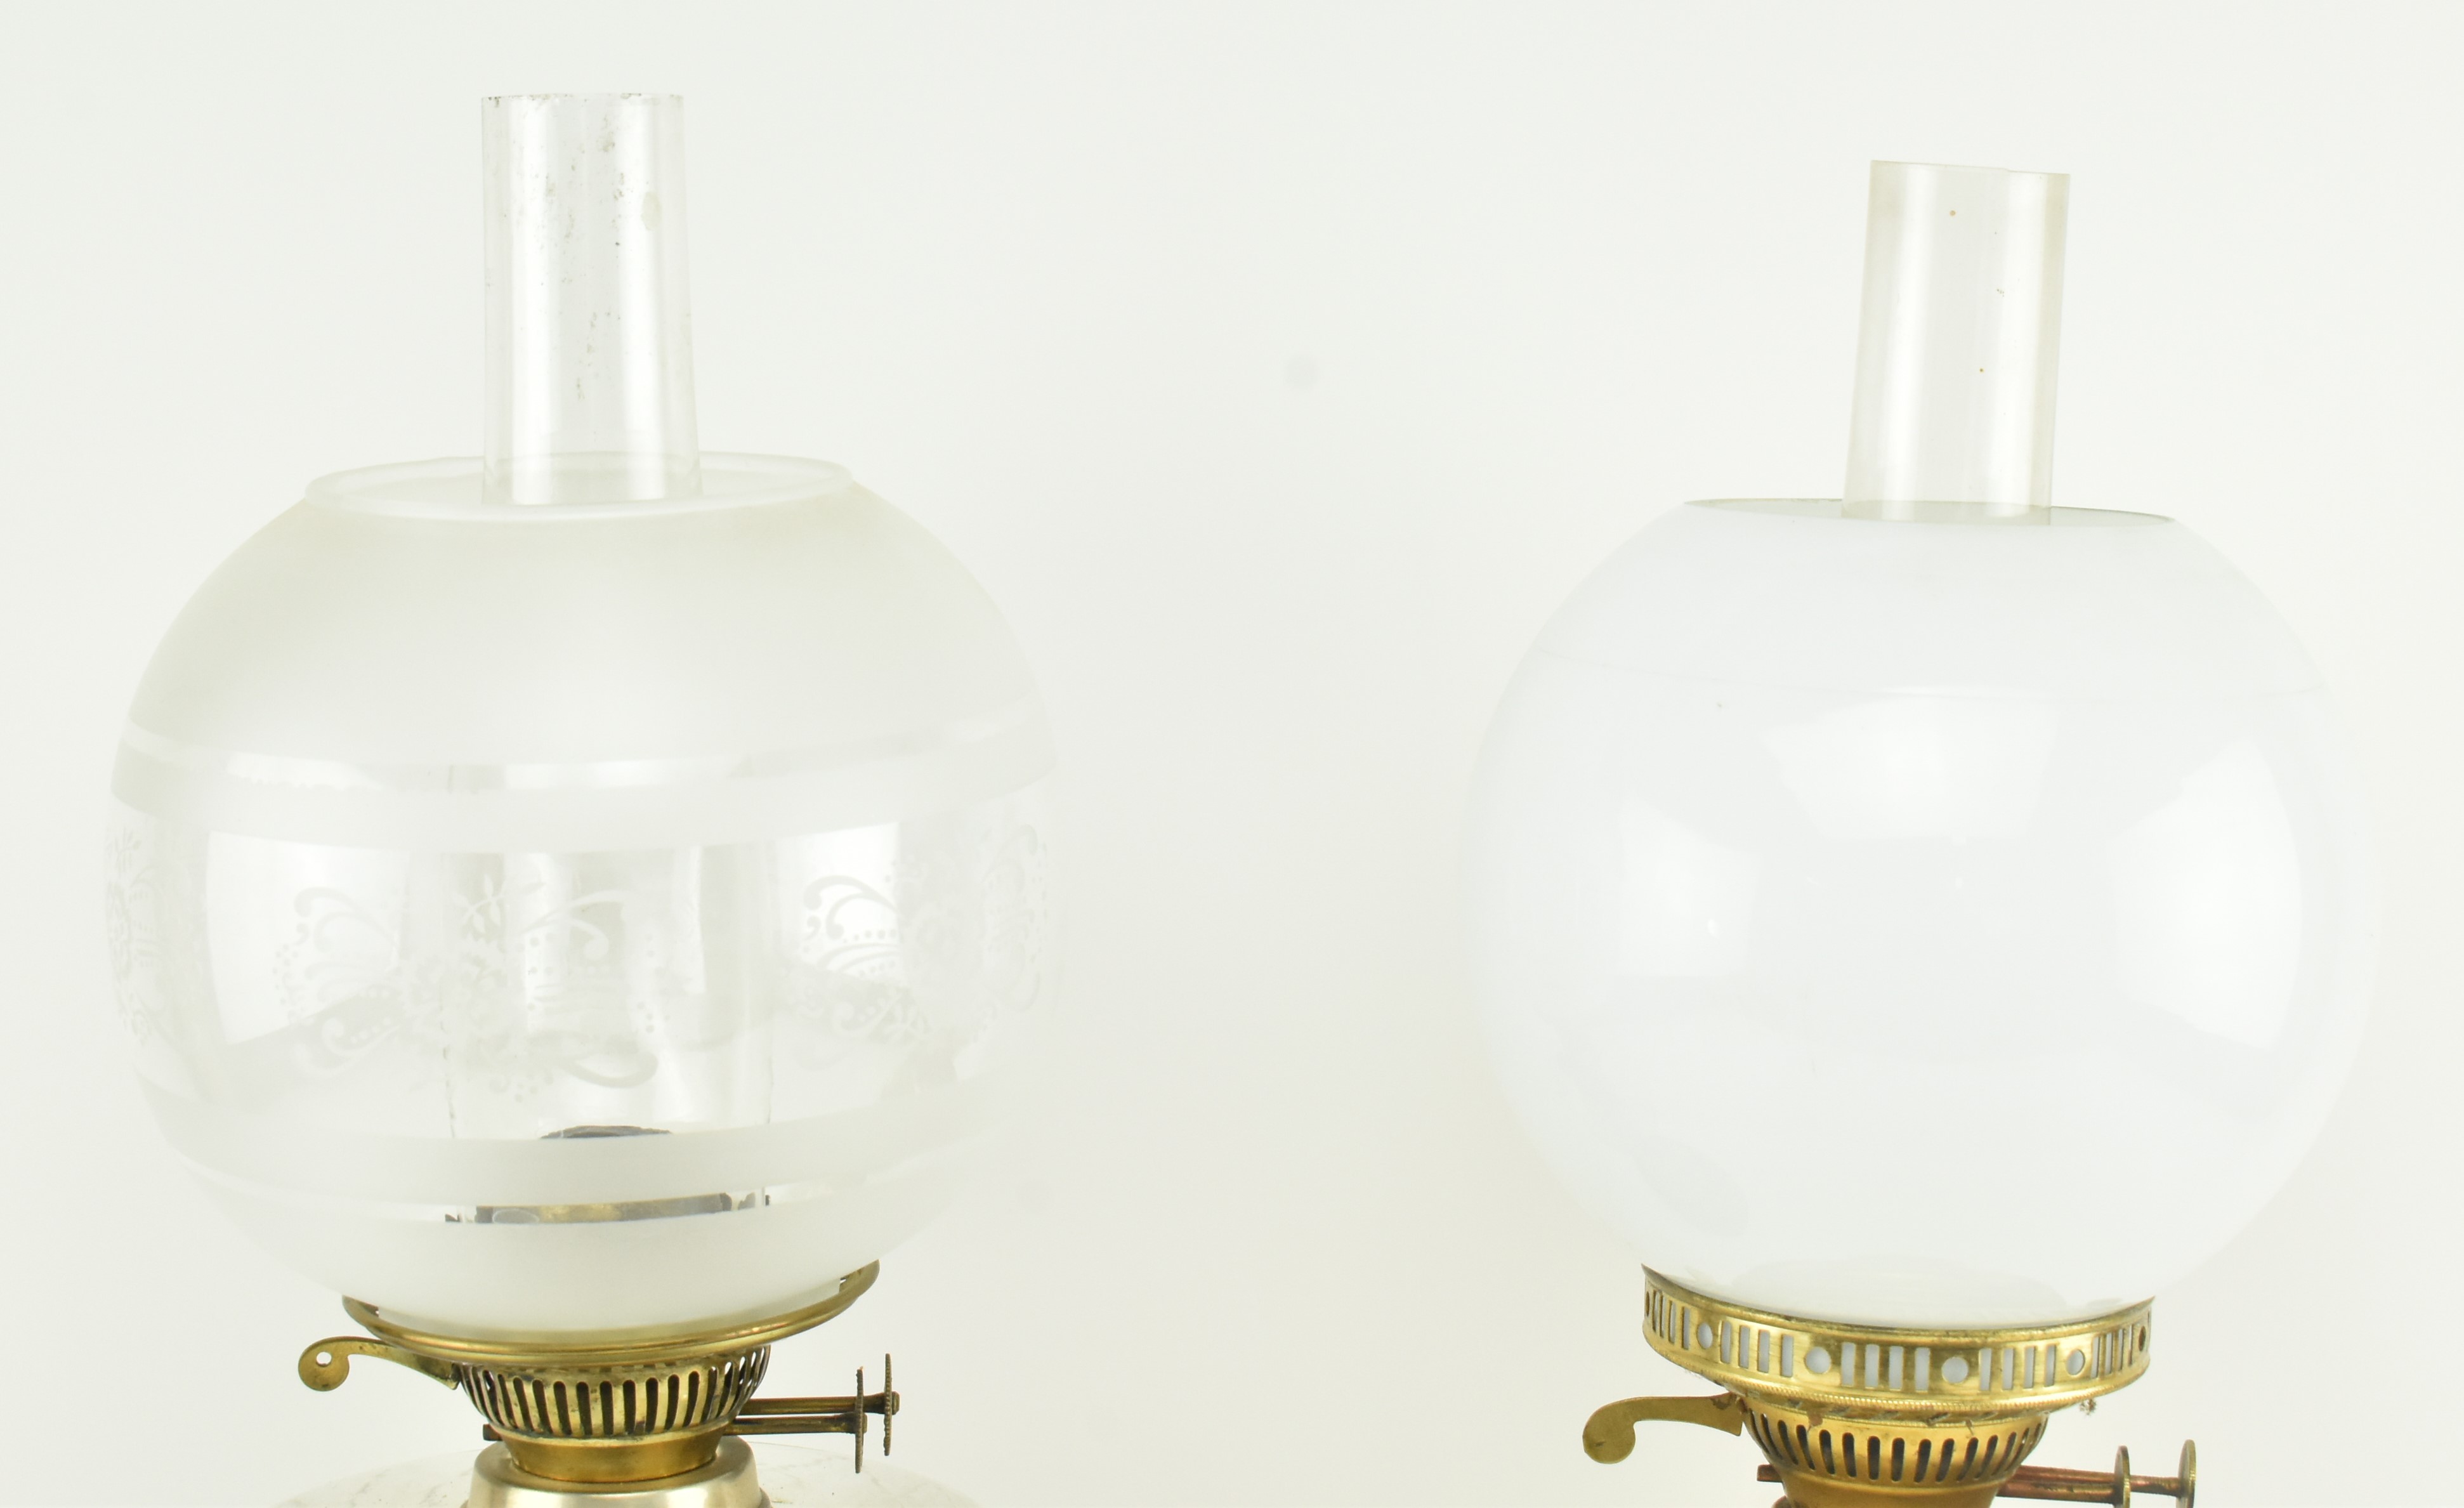 TWO VINTAGE 20TH CENTURY DUPLEX OIL LAMPS - Image 2 of 7